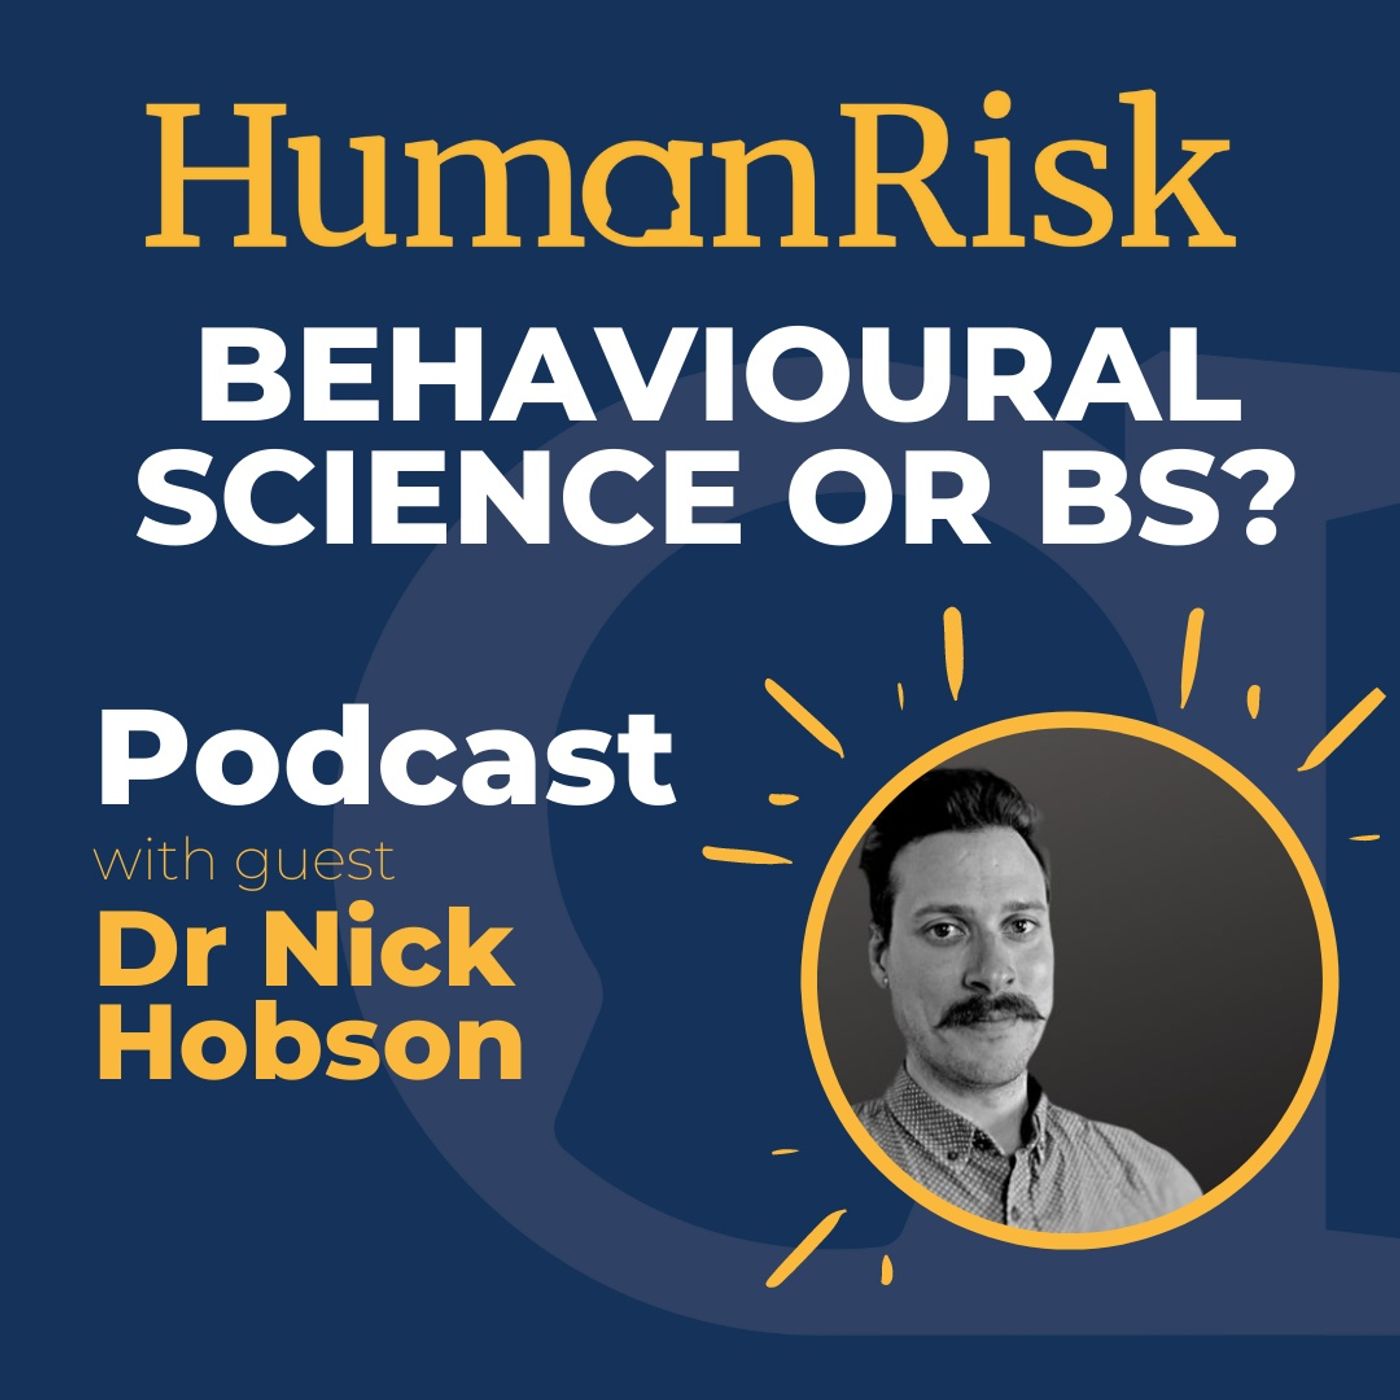 Dr Nick Hobson on Behavioural Science:  what is it? Is it just BS?  Why does it matter?